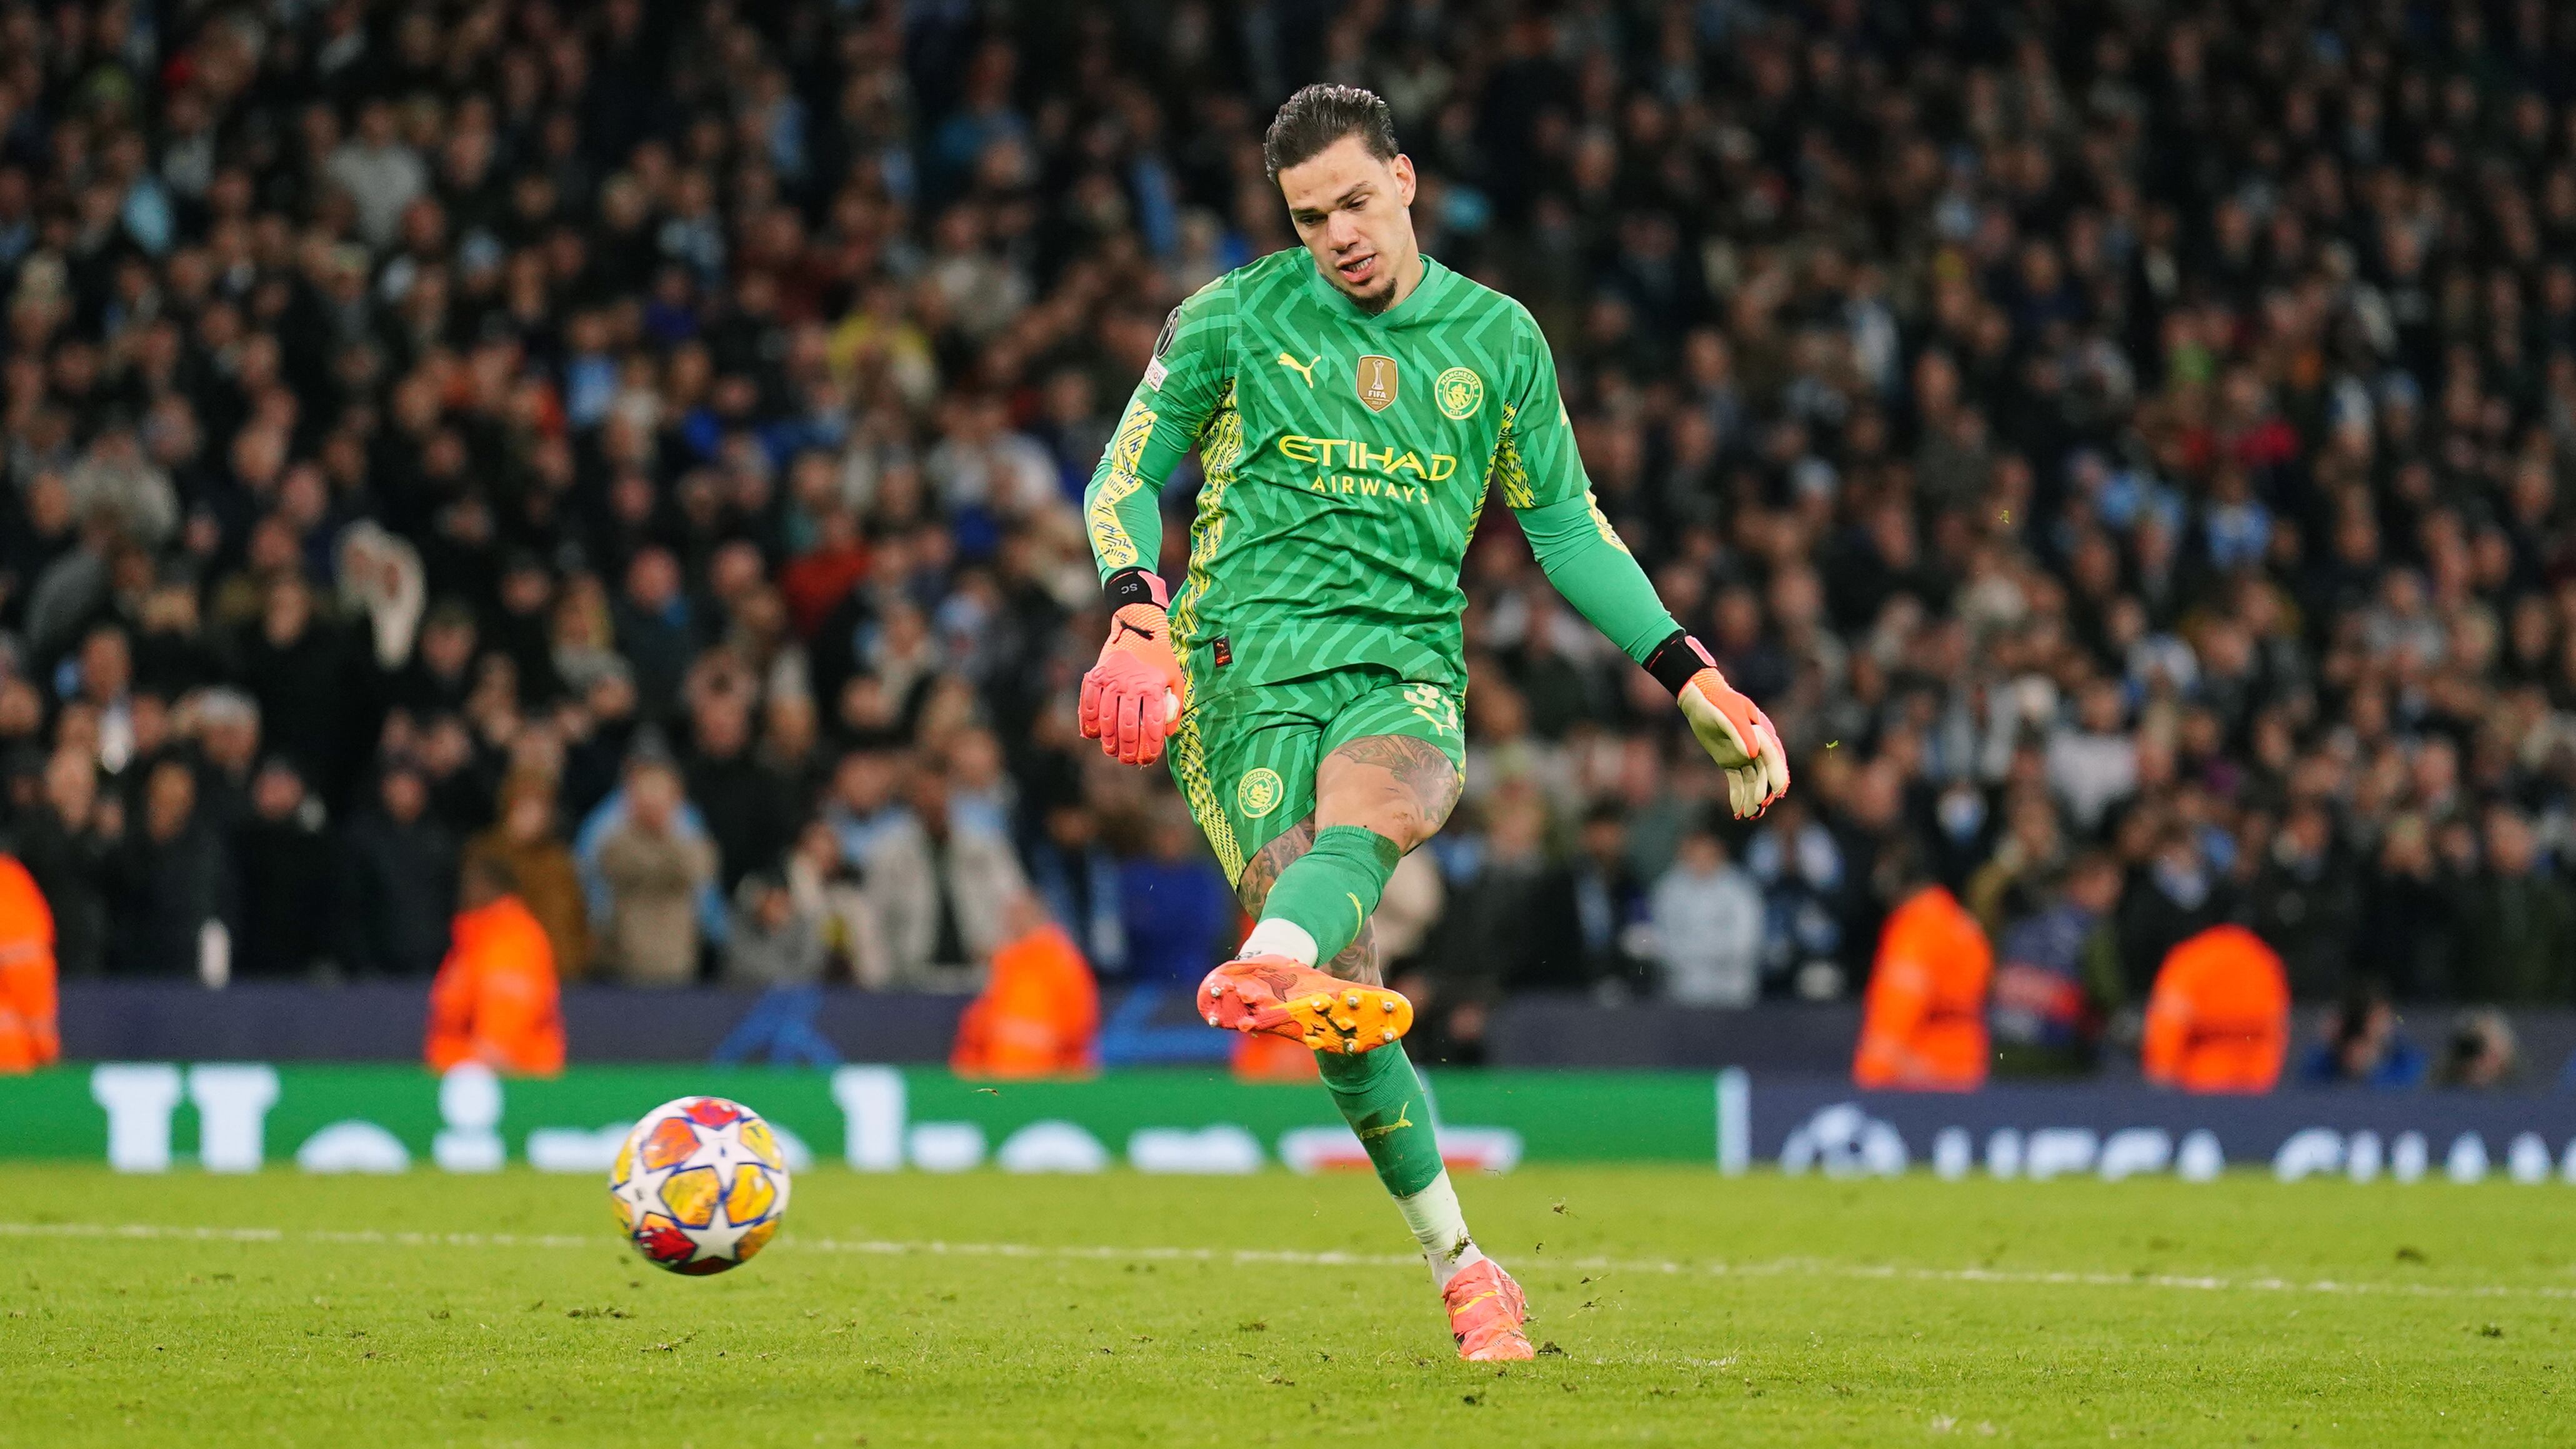 Manchester City goalkeeper Ederson will miss the rest of the season